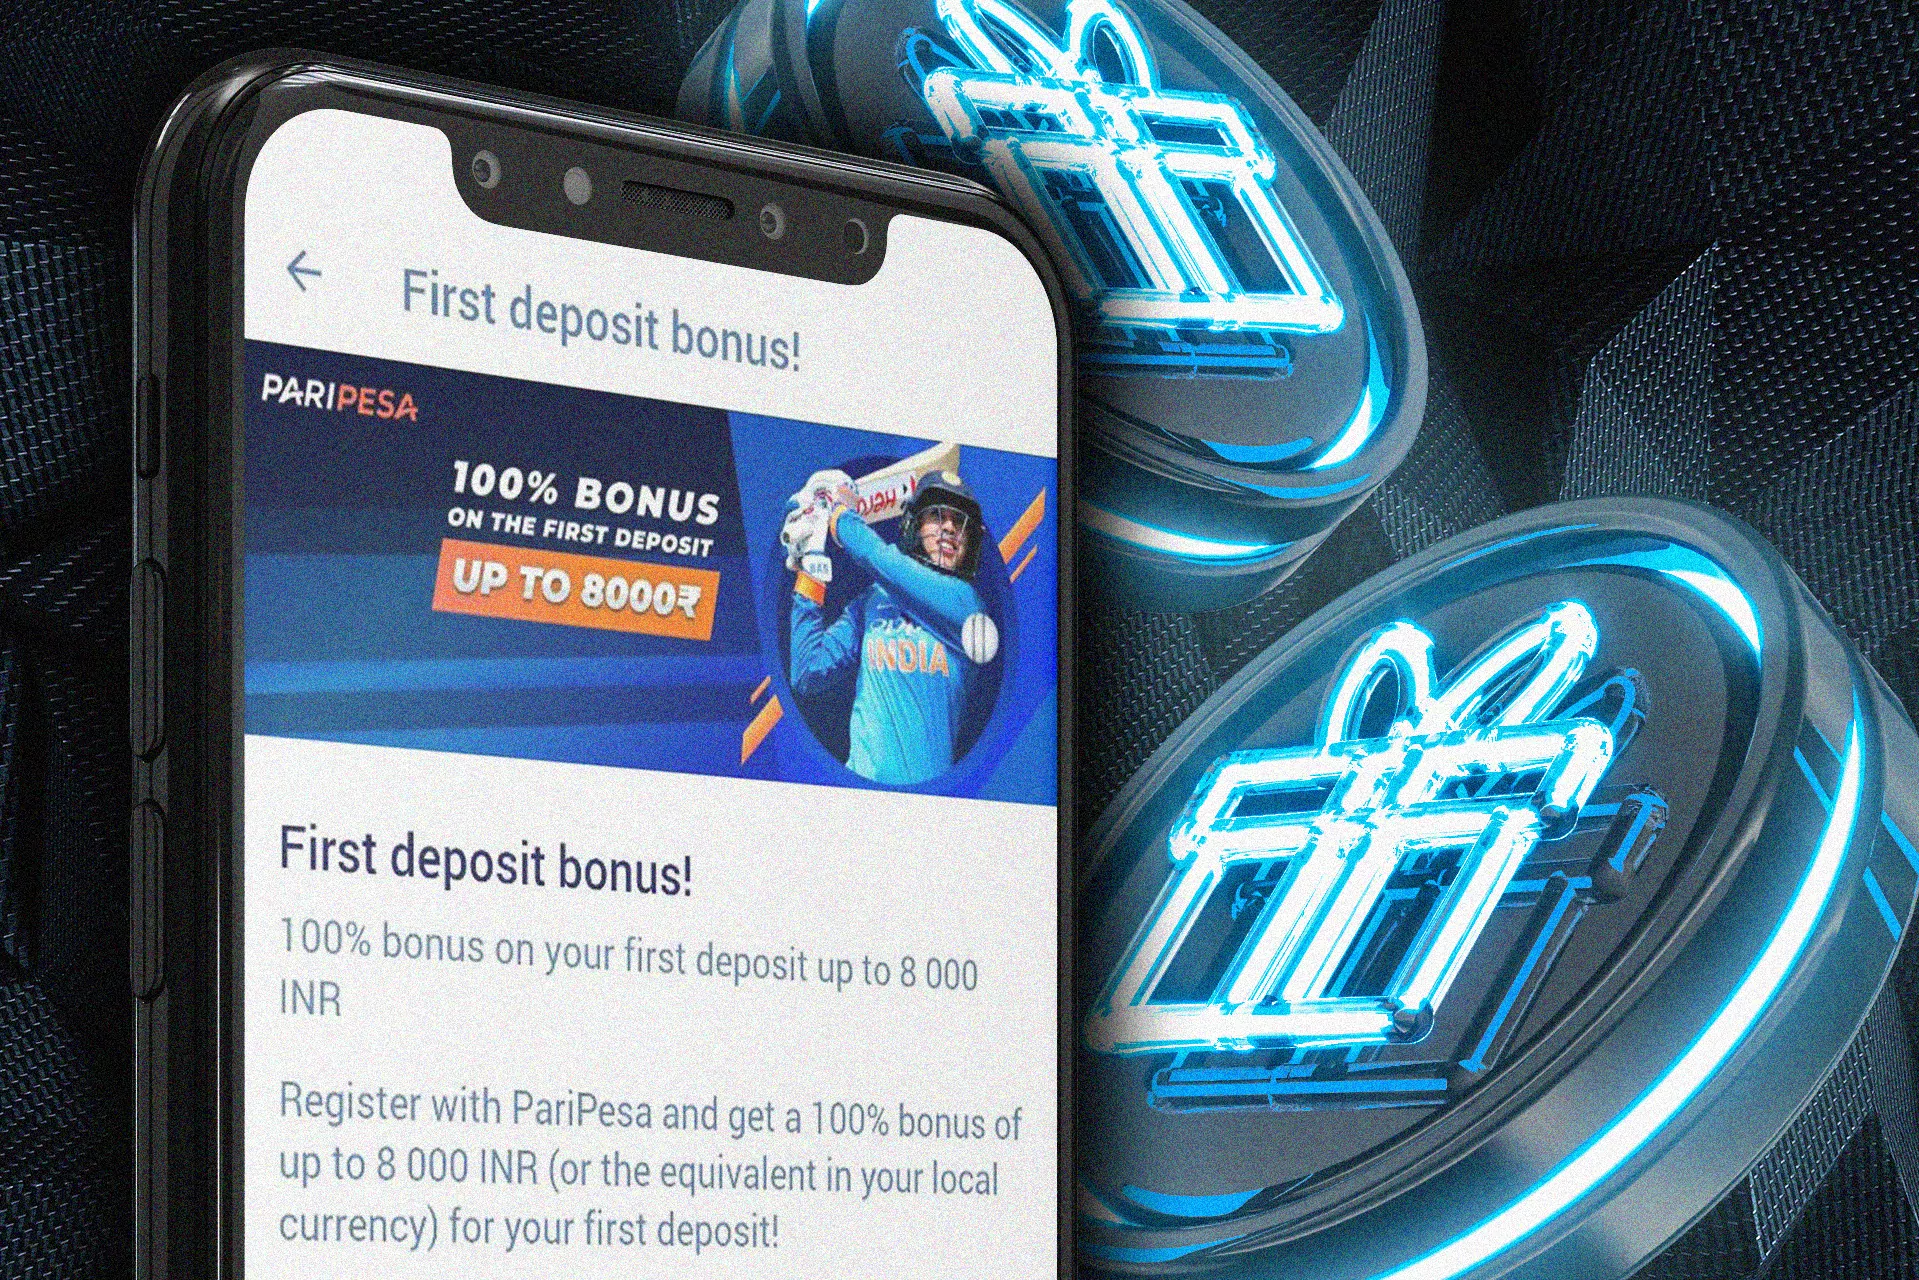 100% welcome bonus on the first deposit from Paripesa.